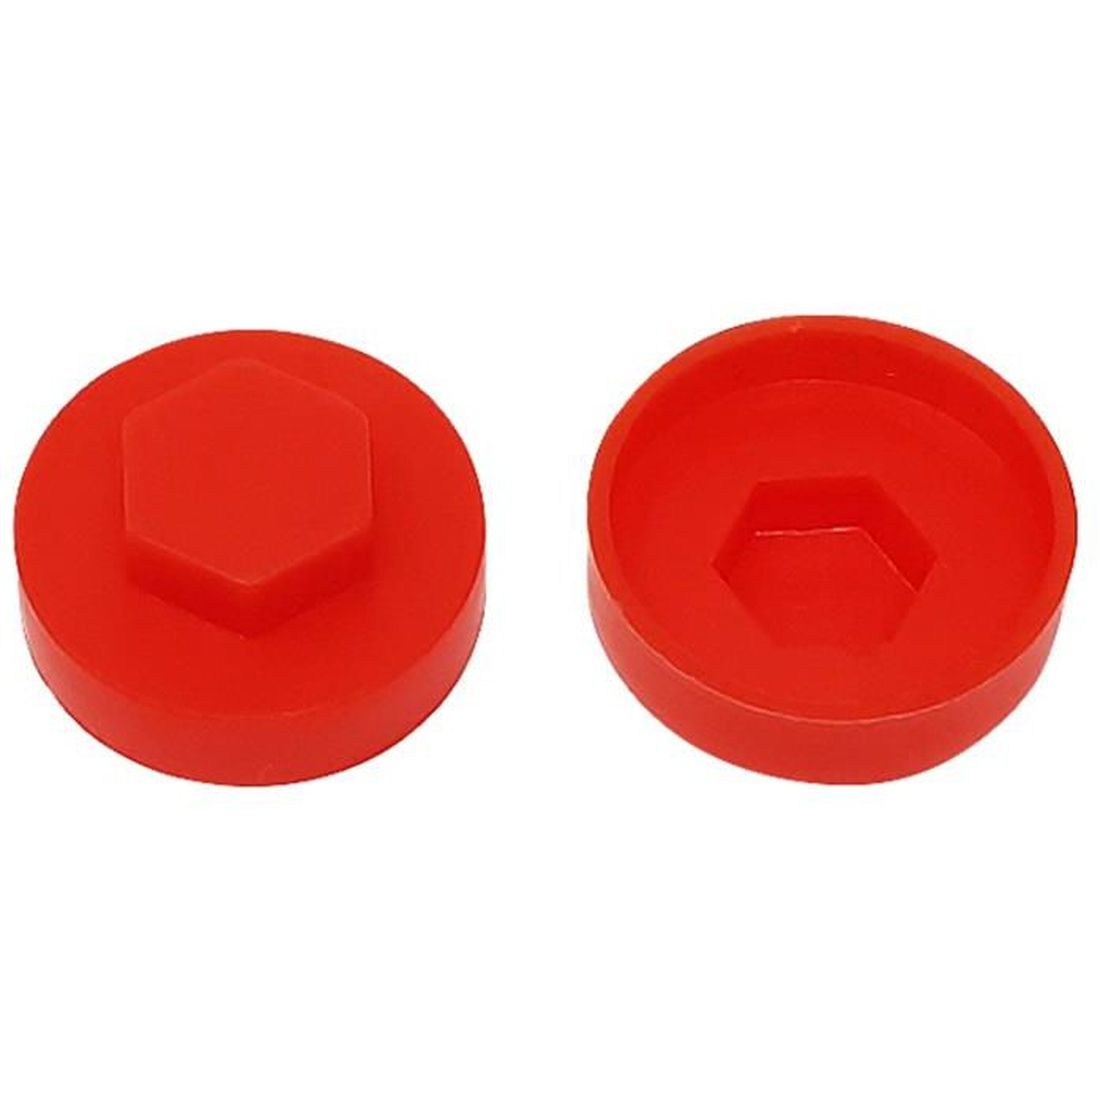 ForgeFix TechFast Cover Cap Poppy Red 19mm (Pack 100)                                    